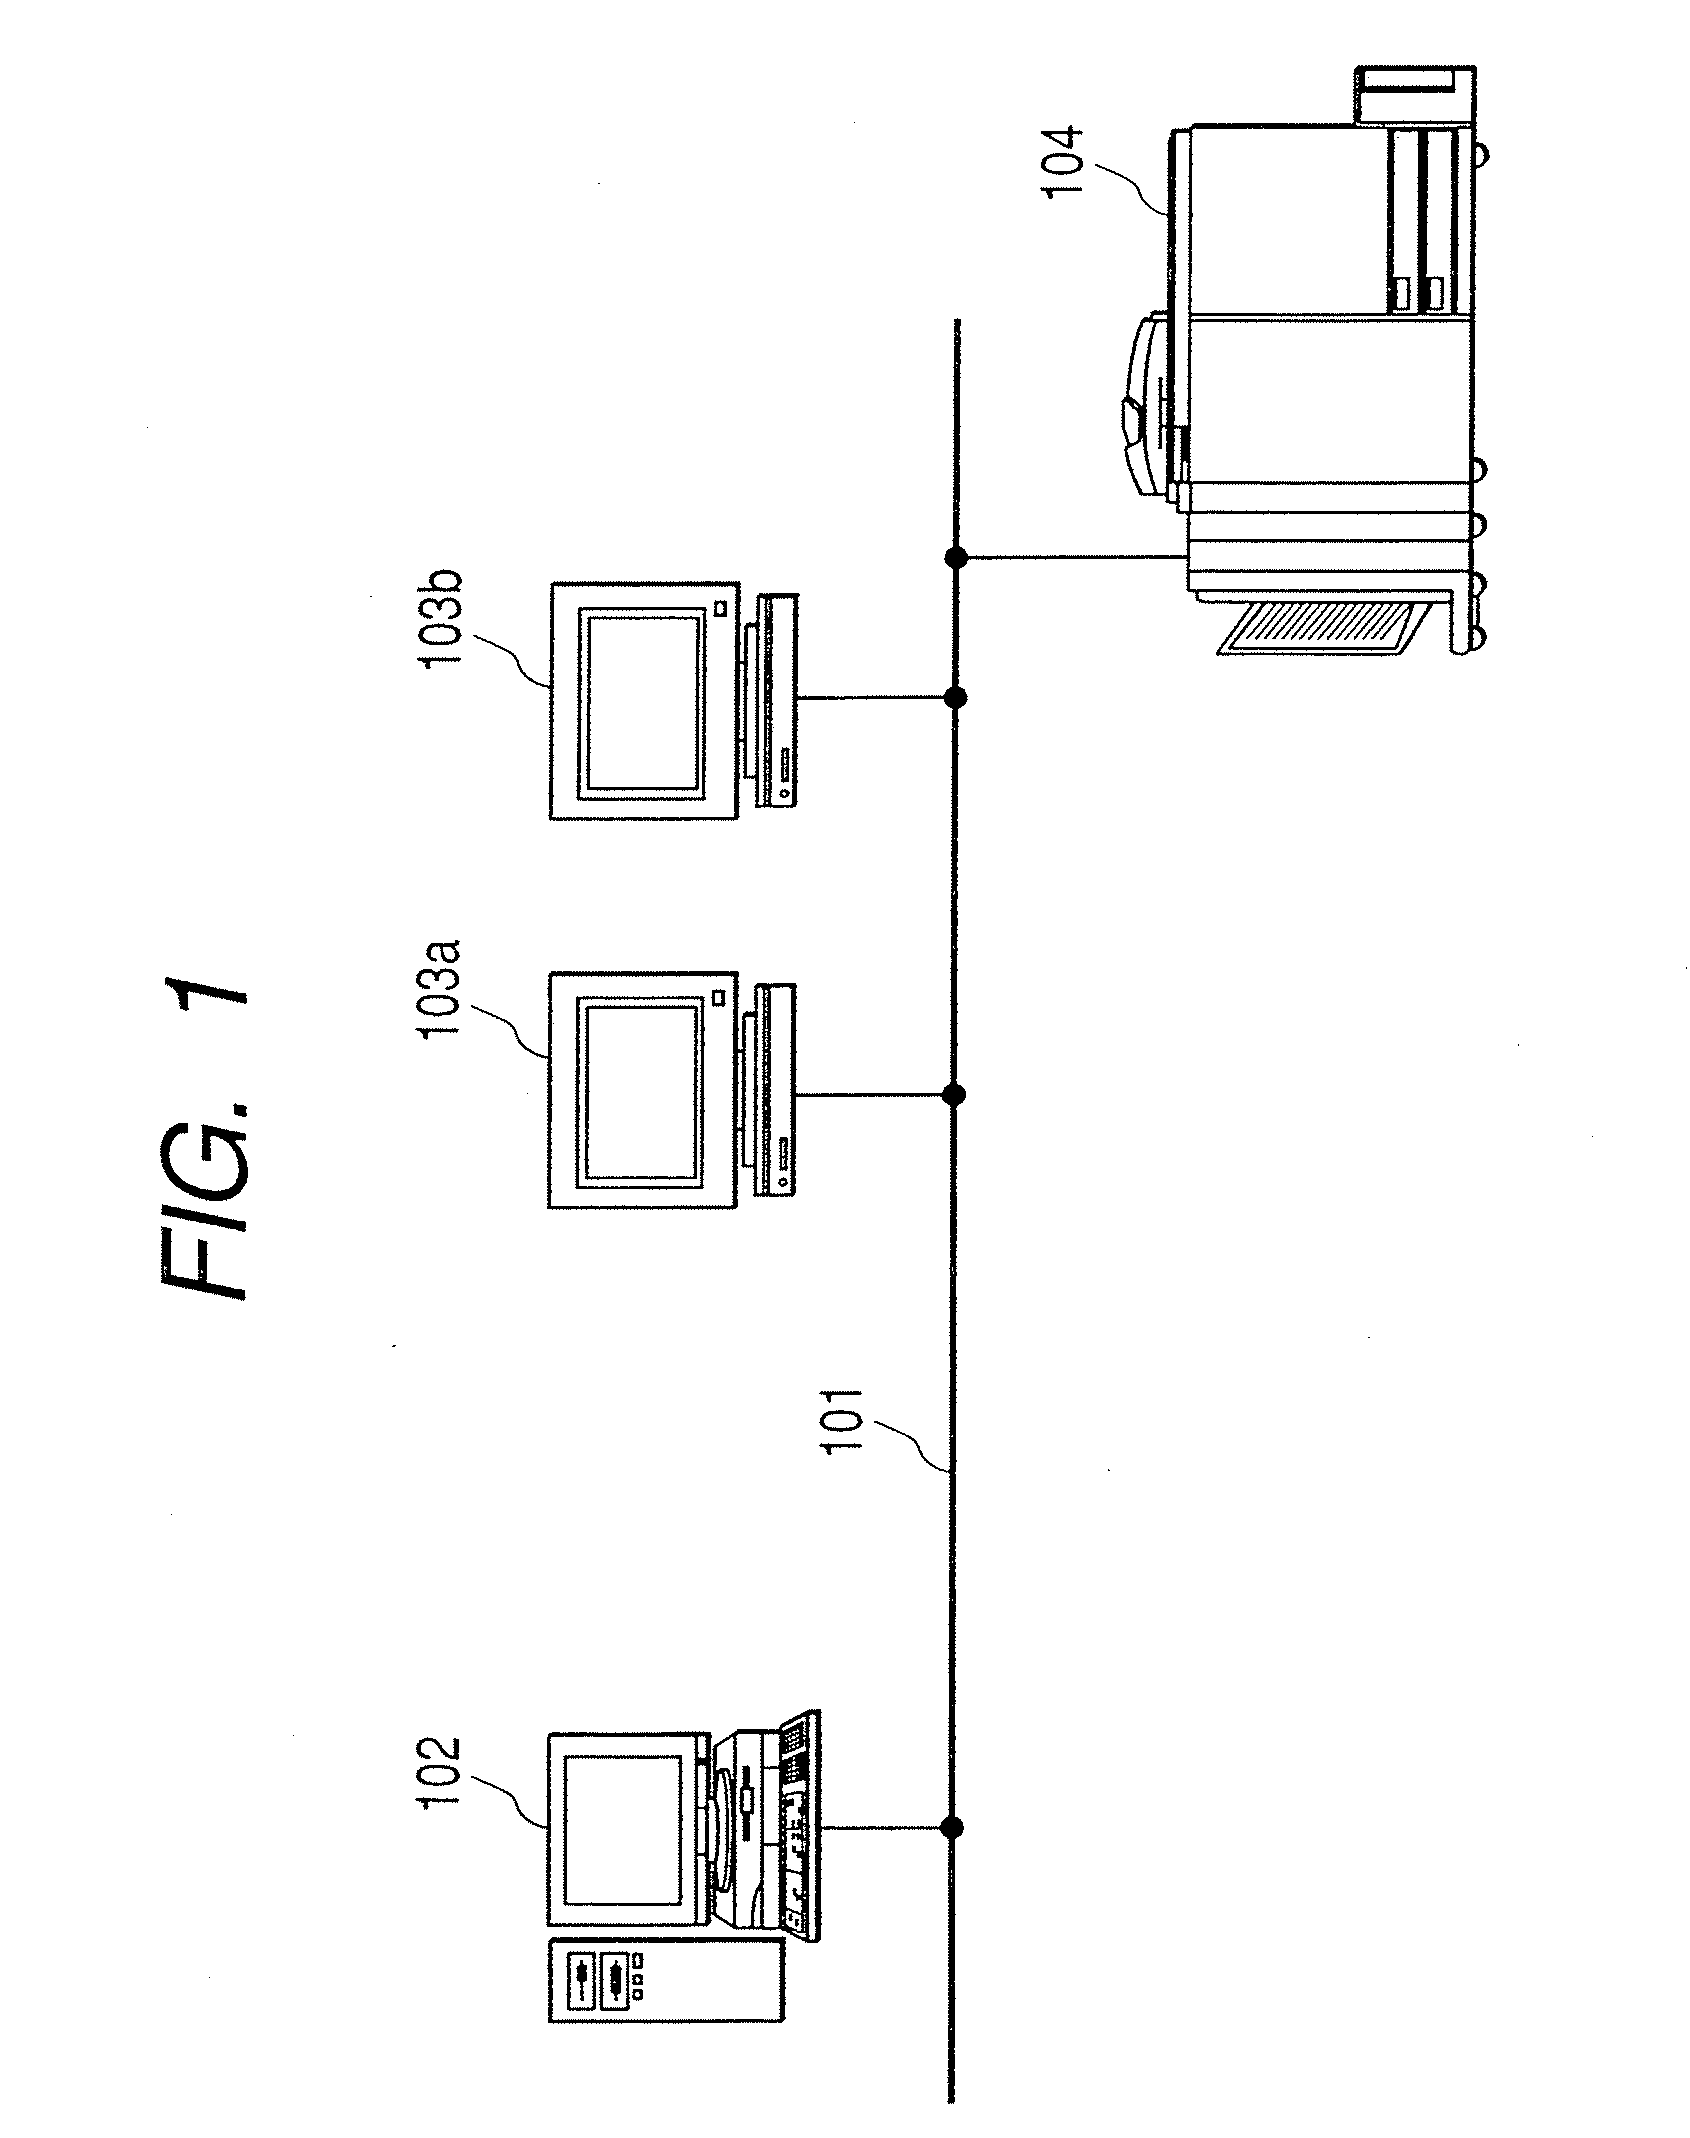 Image forming apparatus having plural image supporting bodies